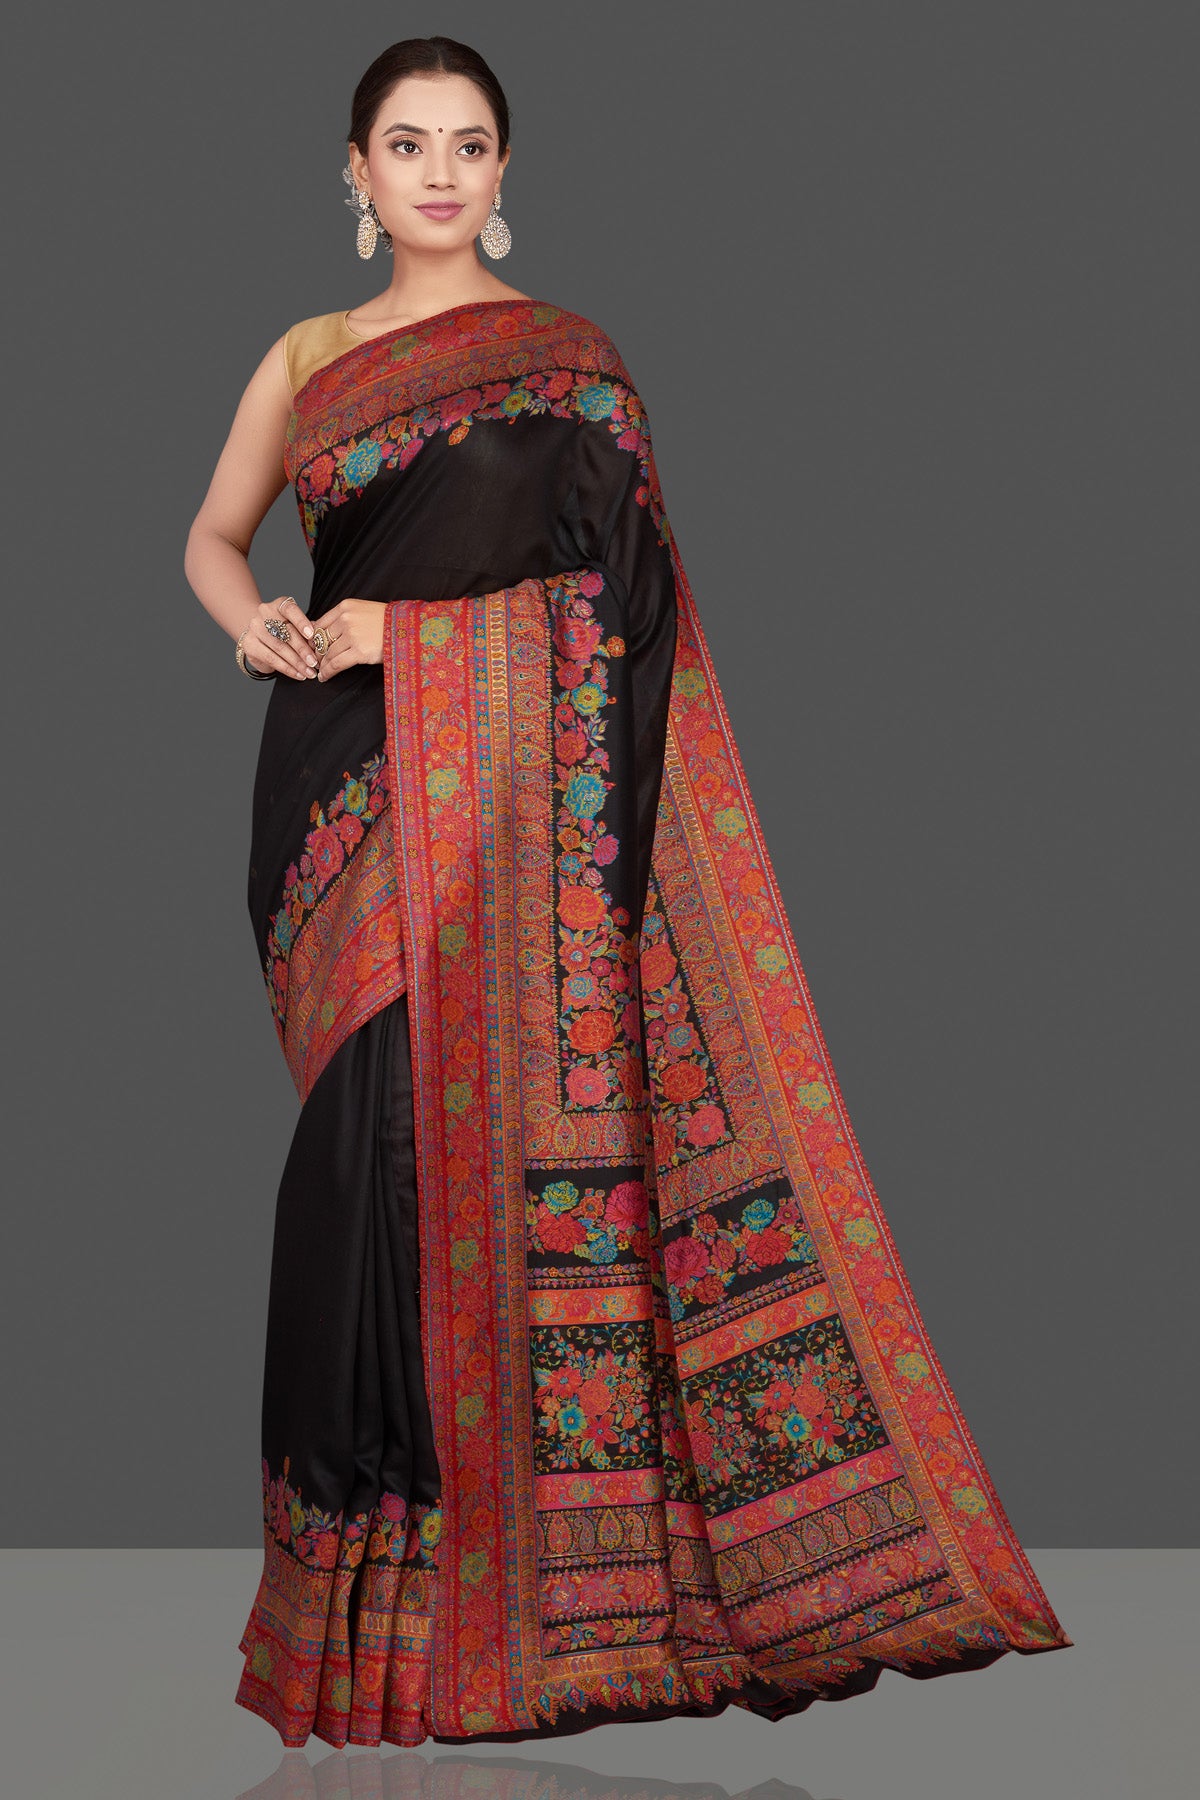 Buy stunning black tussar muga silk saree online in USA with Kani embroidery border. Get ready for festive occasions and weddings in tasteful designer sarees, Banarasi sarees, handwoven sarees from Pure Elegance Indian clothing store in USA.-full view